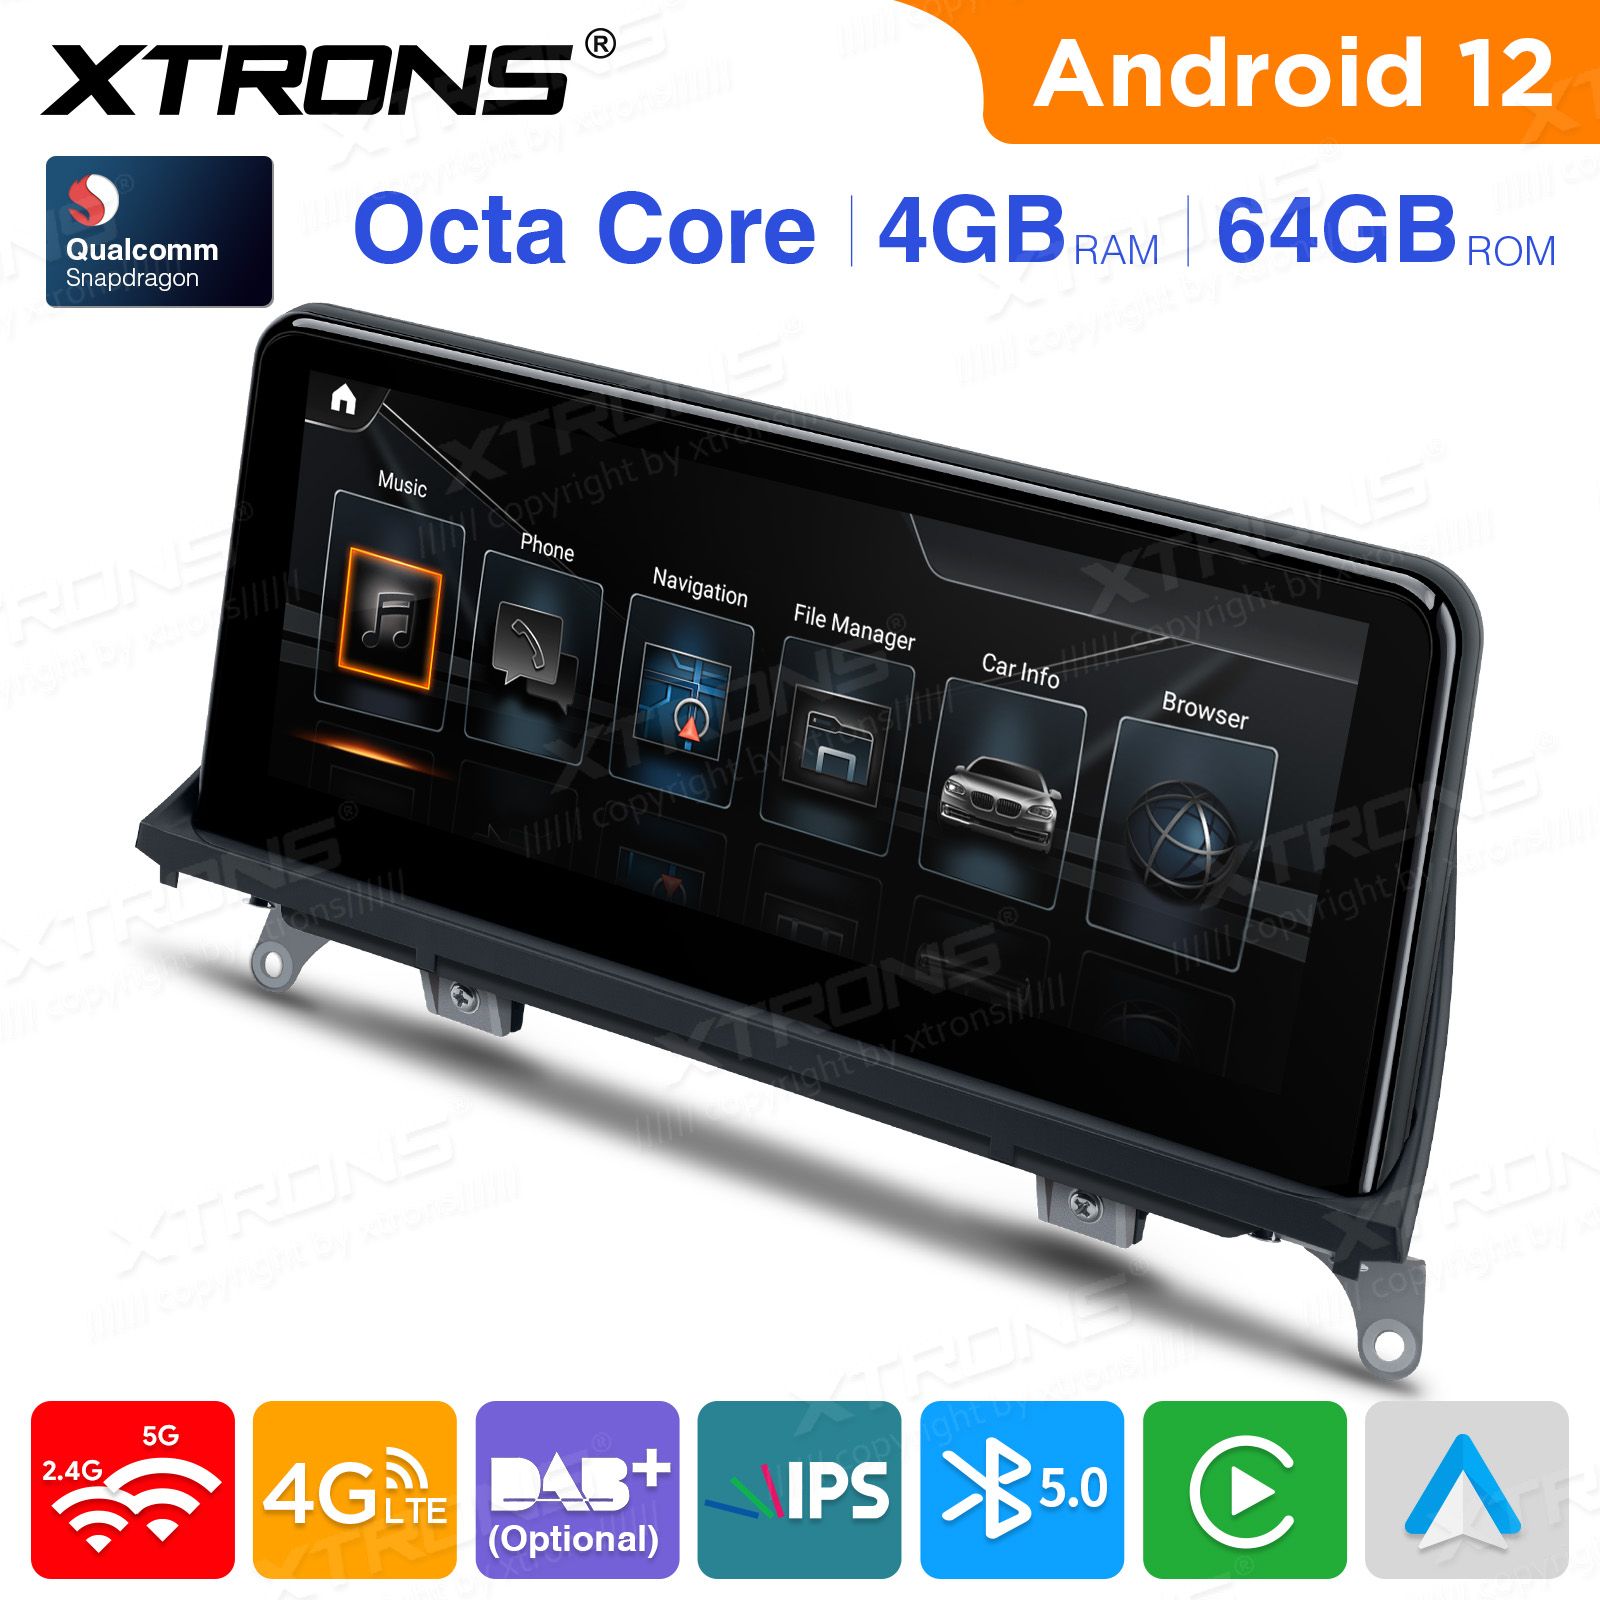 XTRONS Single Din Car Stereo for Fiat 500, Android 12 Octa Core 4GB RAM  64GB ROM Car Radio Player, 7 Inch IPS Touch Screen GPS Navigation for Car  Head